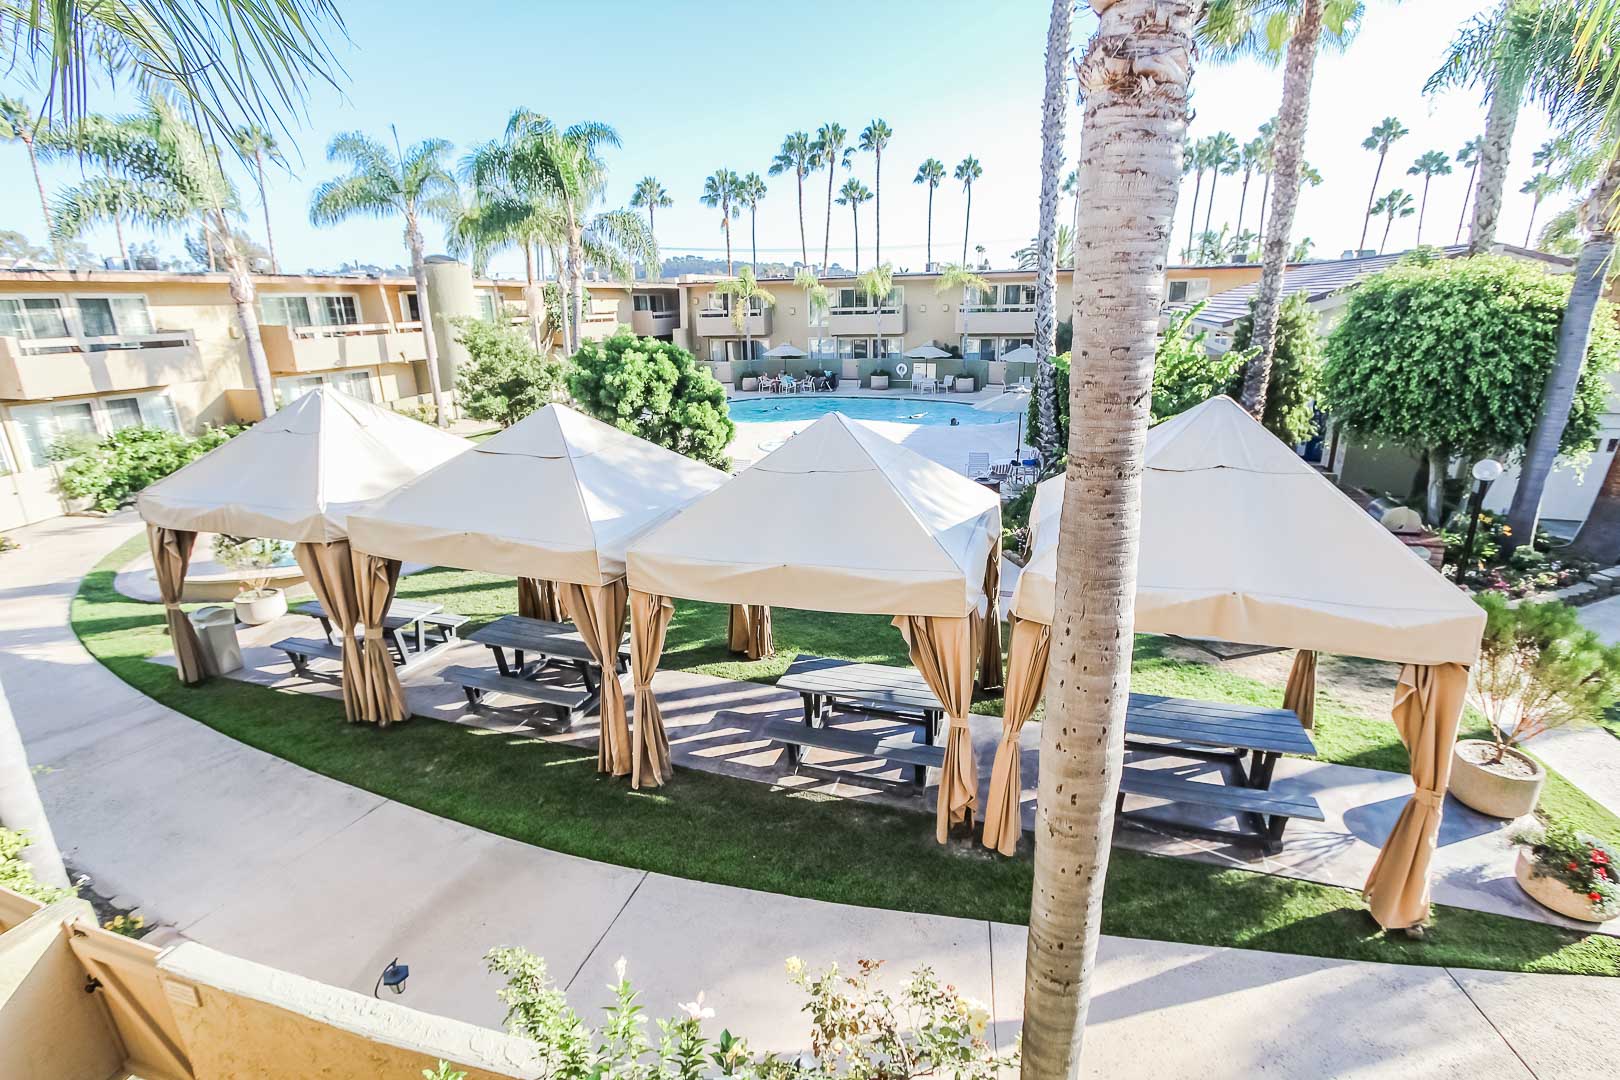 A relaxing outside view of VRI's Winner Circle Resort in California.